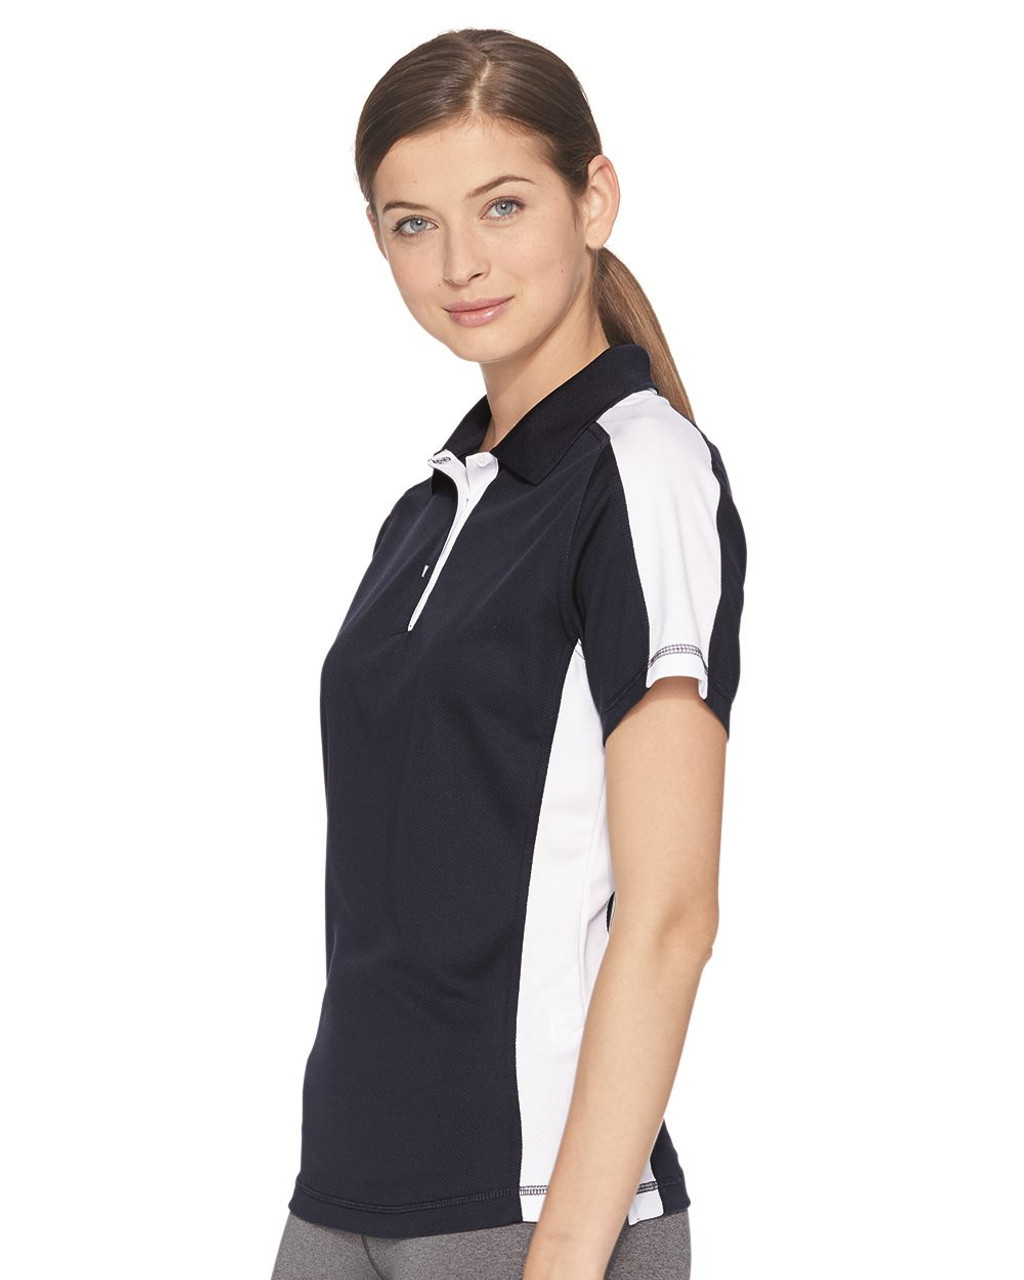 Embroidered Women's Colorblocked Moisture Free Mesh Polo - 5465